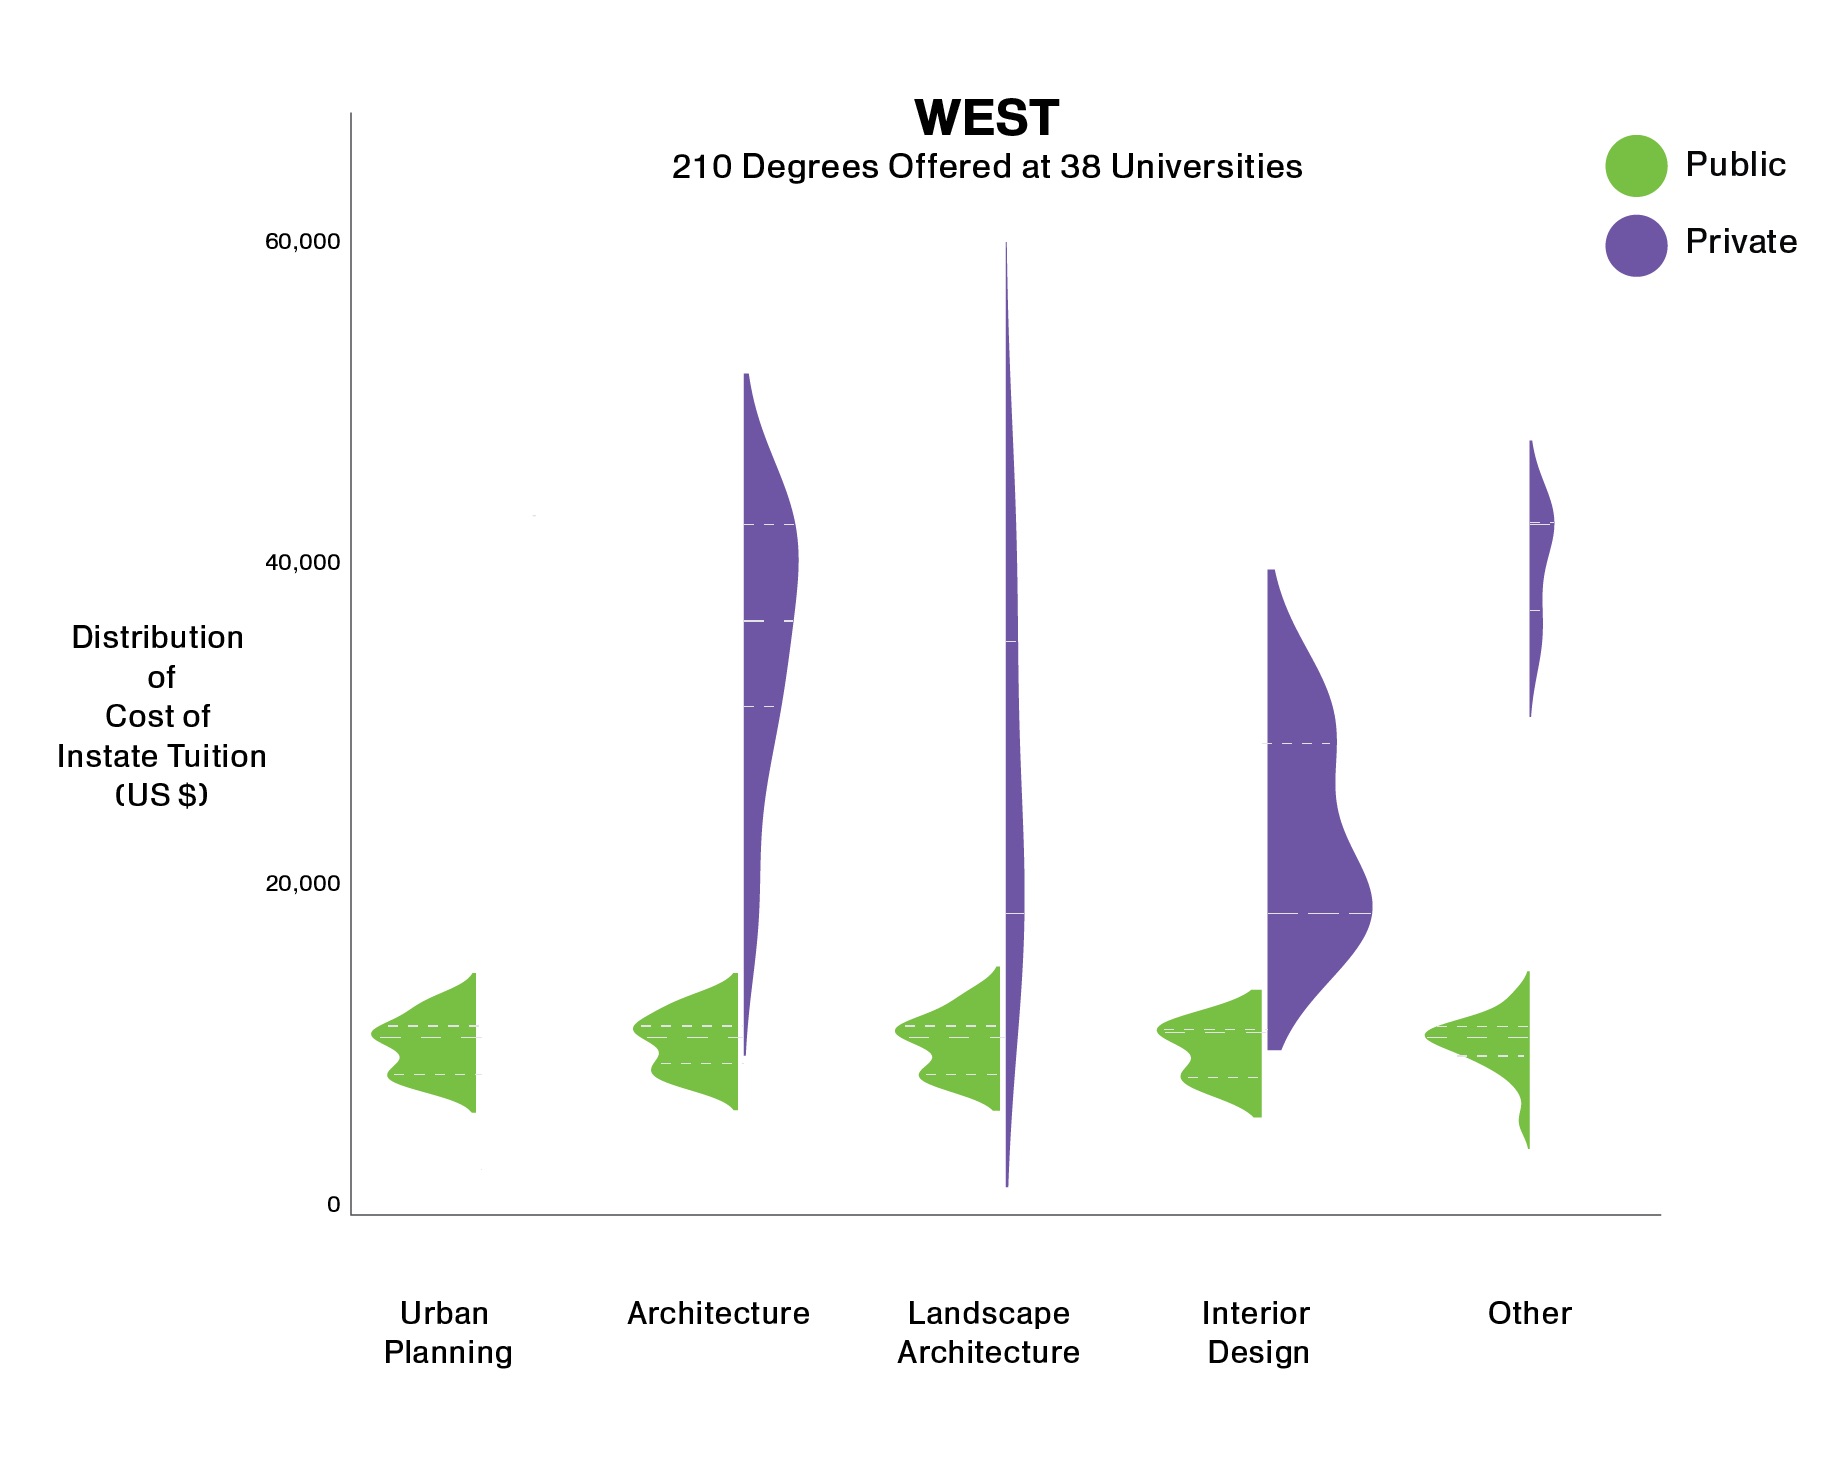 Comparison of Tuition Costs in the West by Area of Study